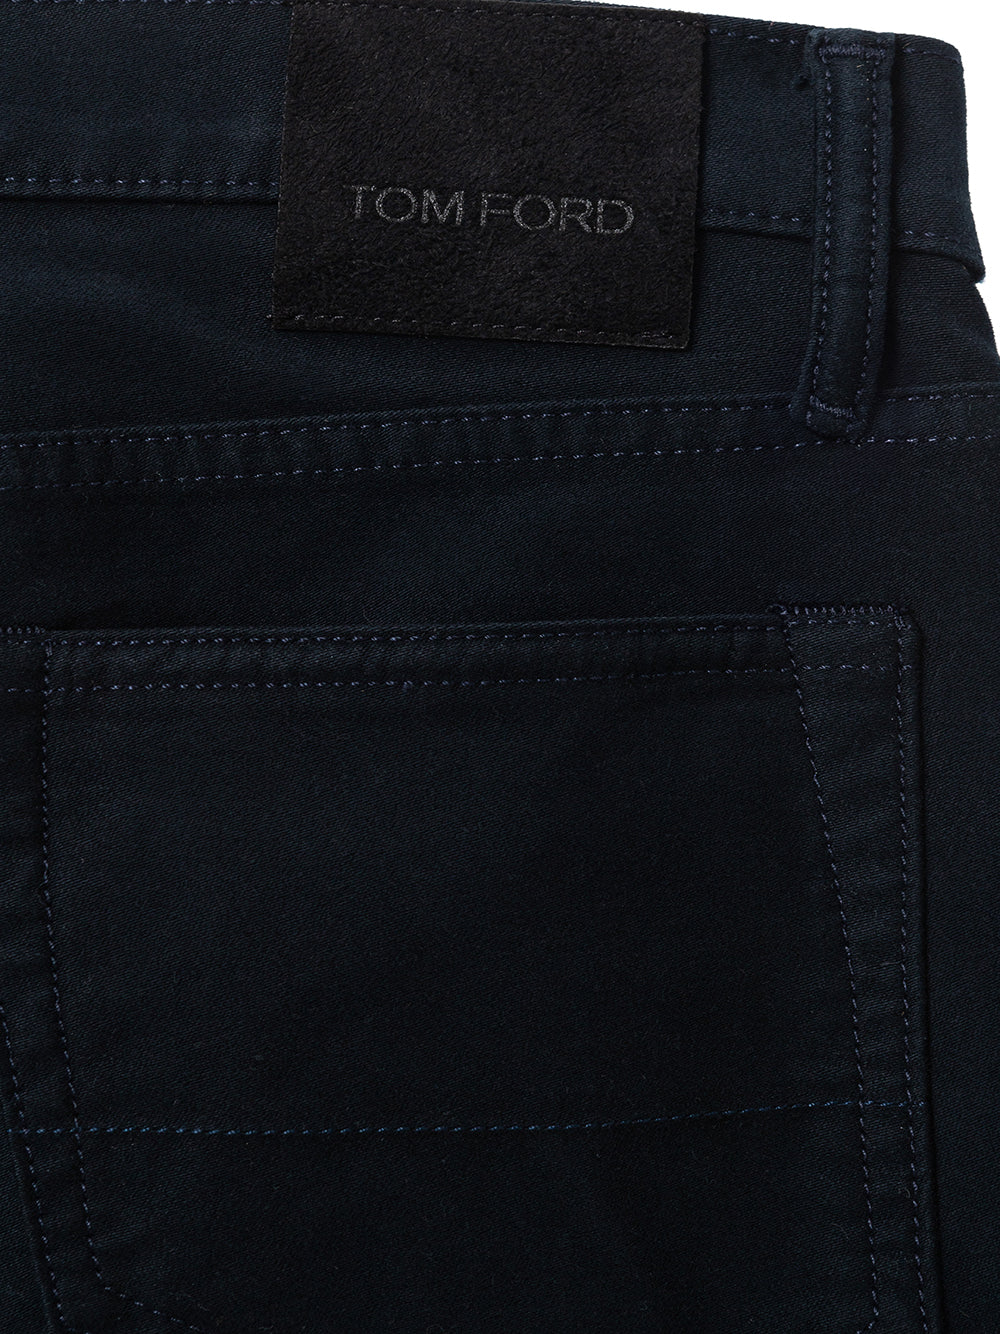 Tom Ford Stretch Five Pocket Trousers